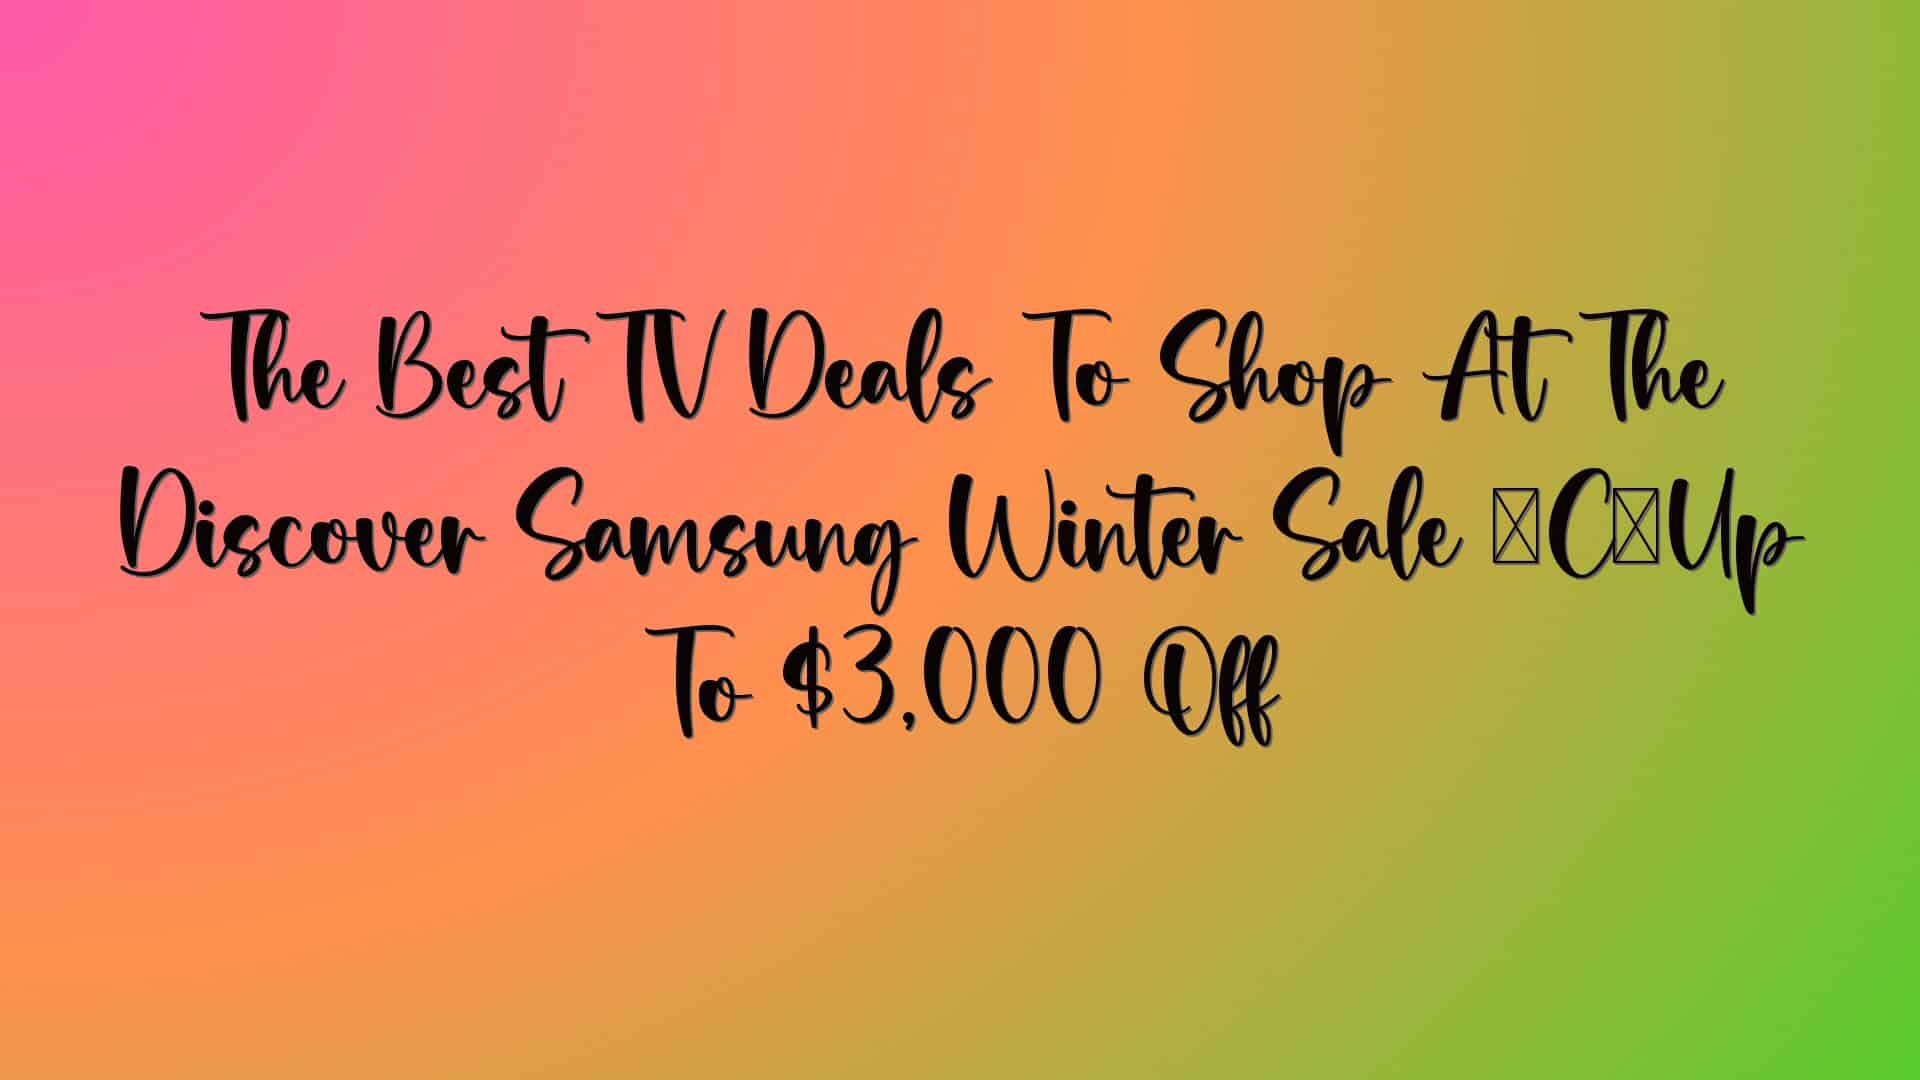 The Best TV Deals To Shop At The Discover Samsung Winter Sale — Up To $3,000 Off